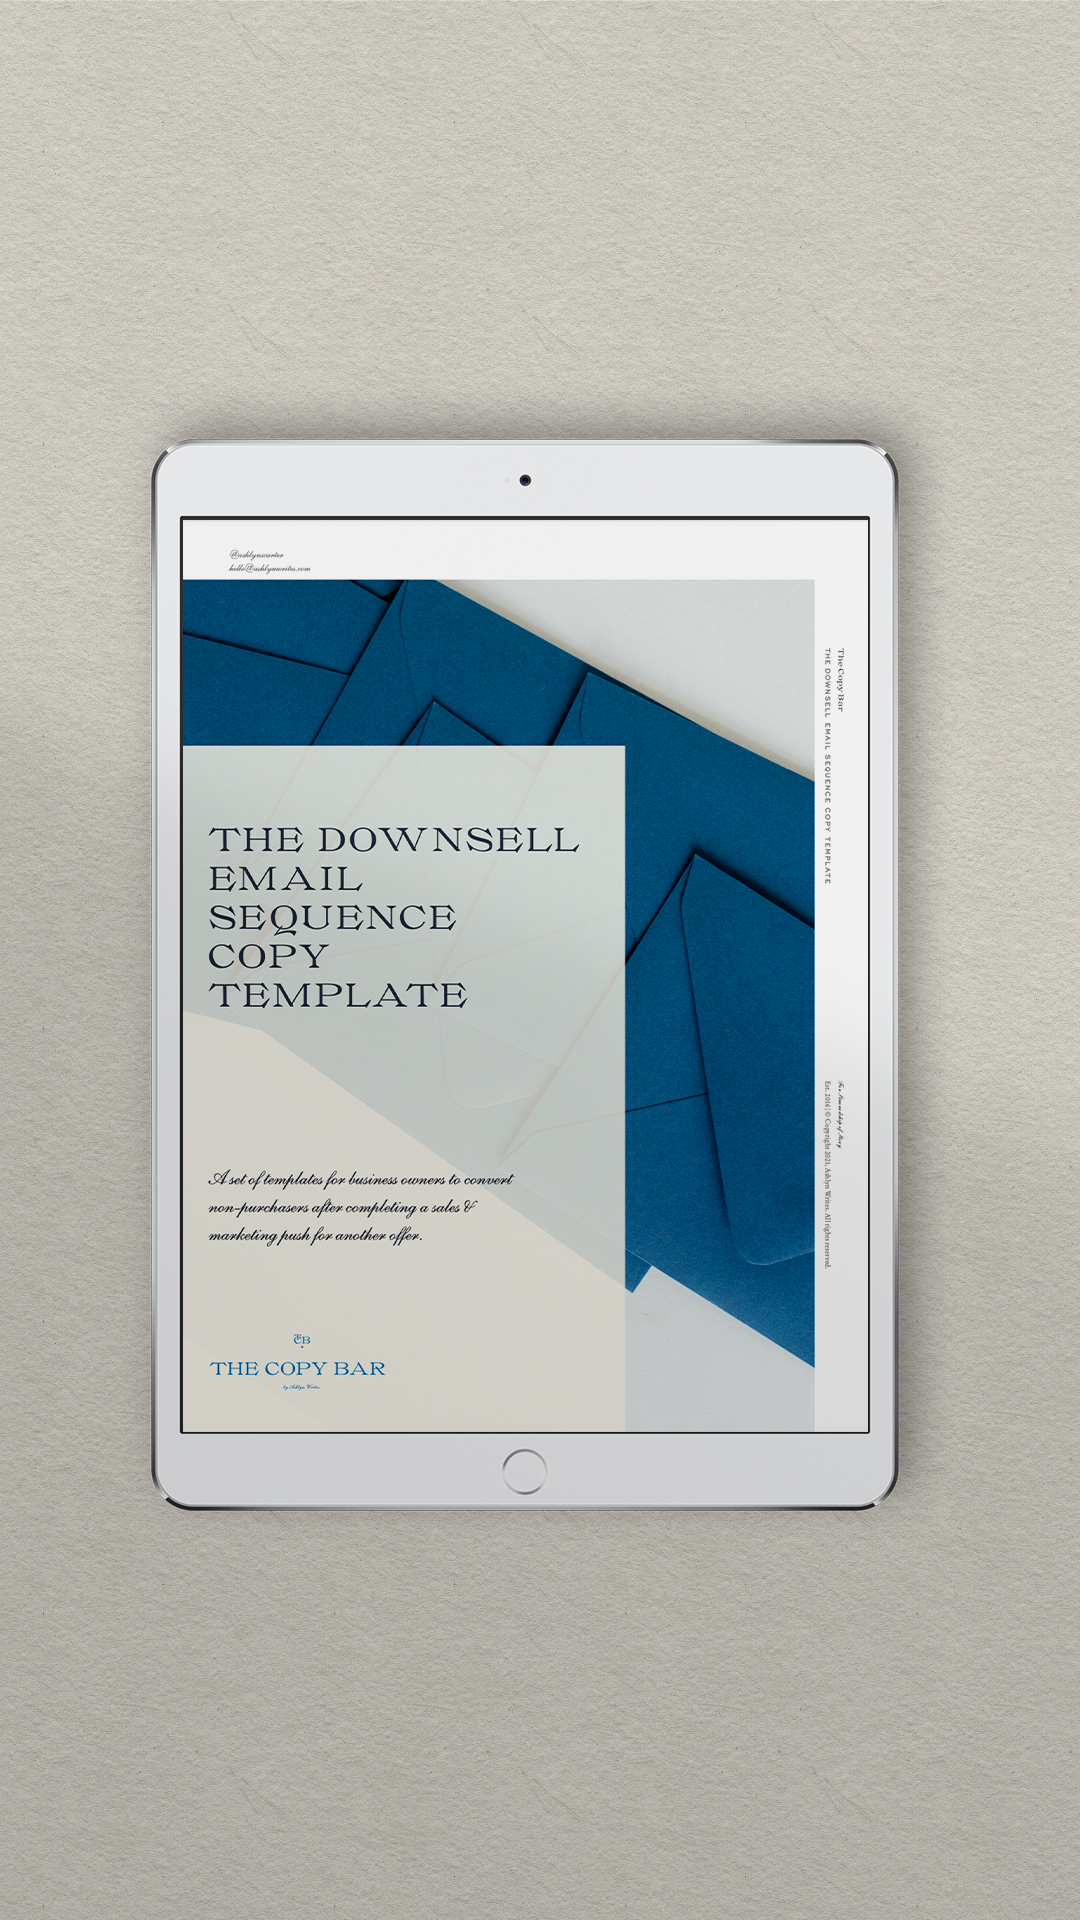 The Downsell Email Sequence Copy Template